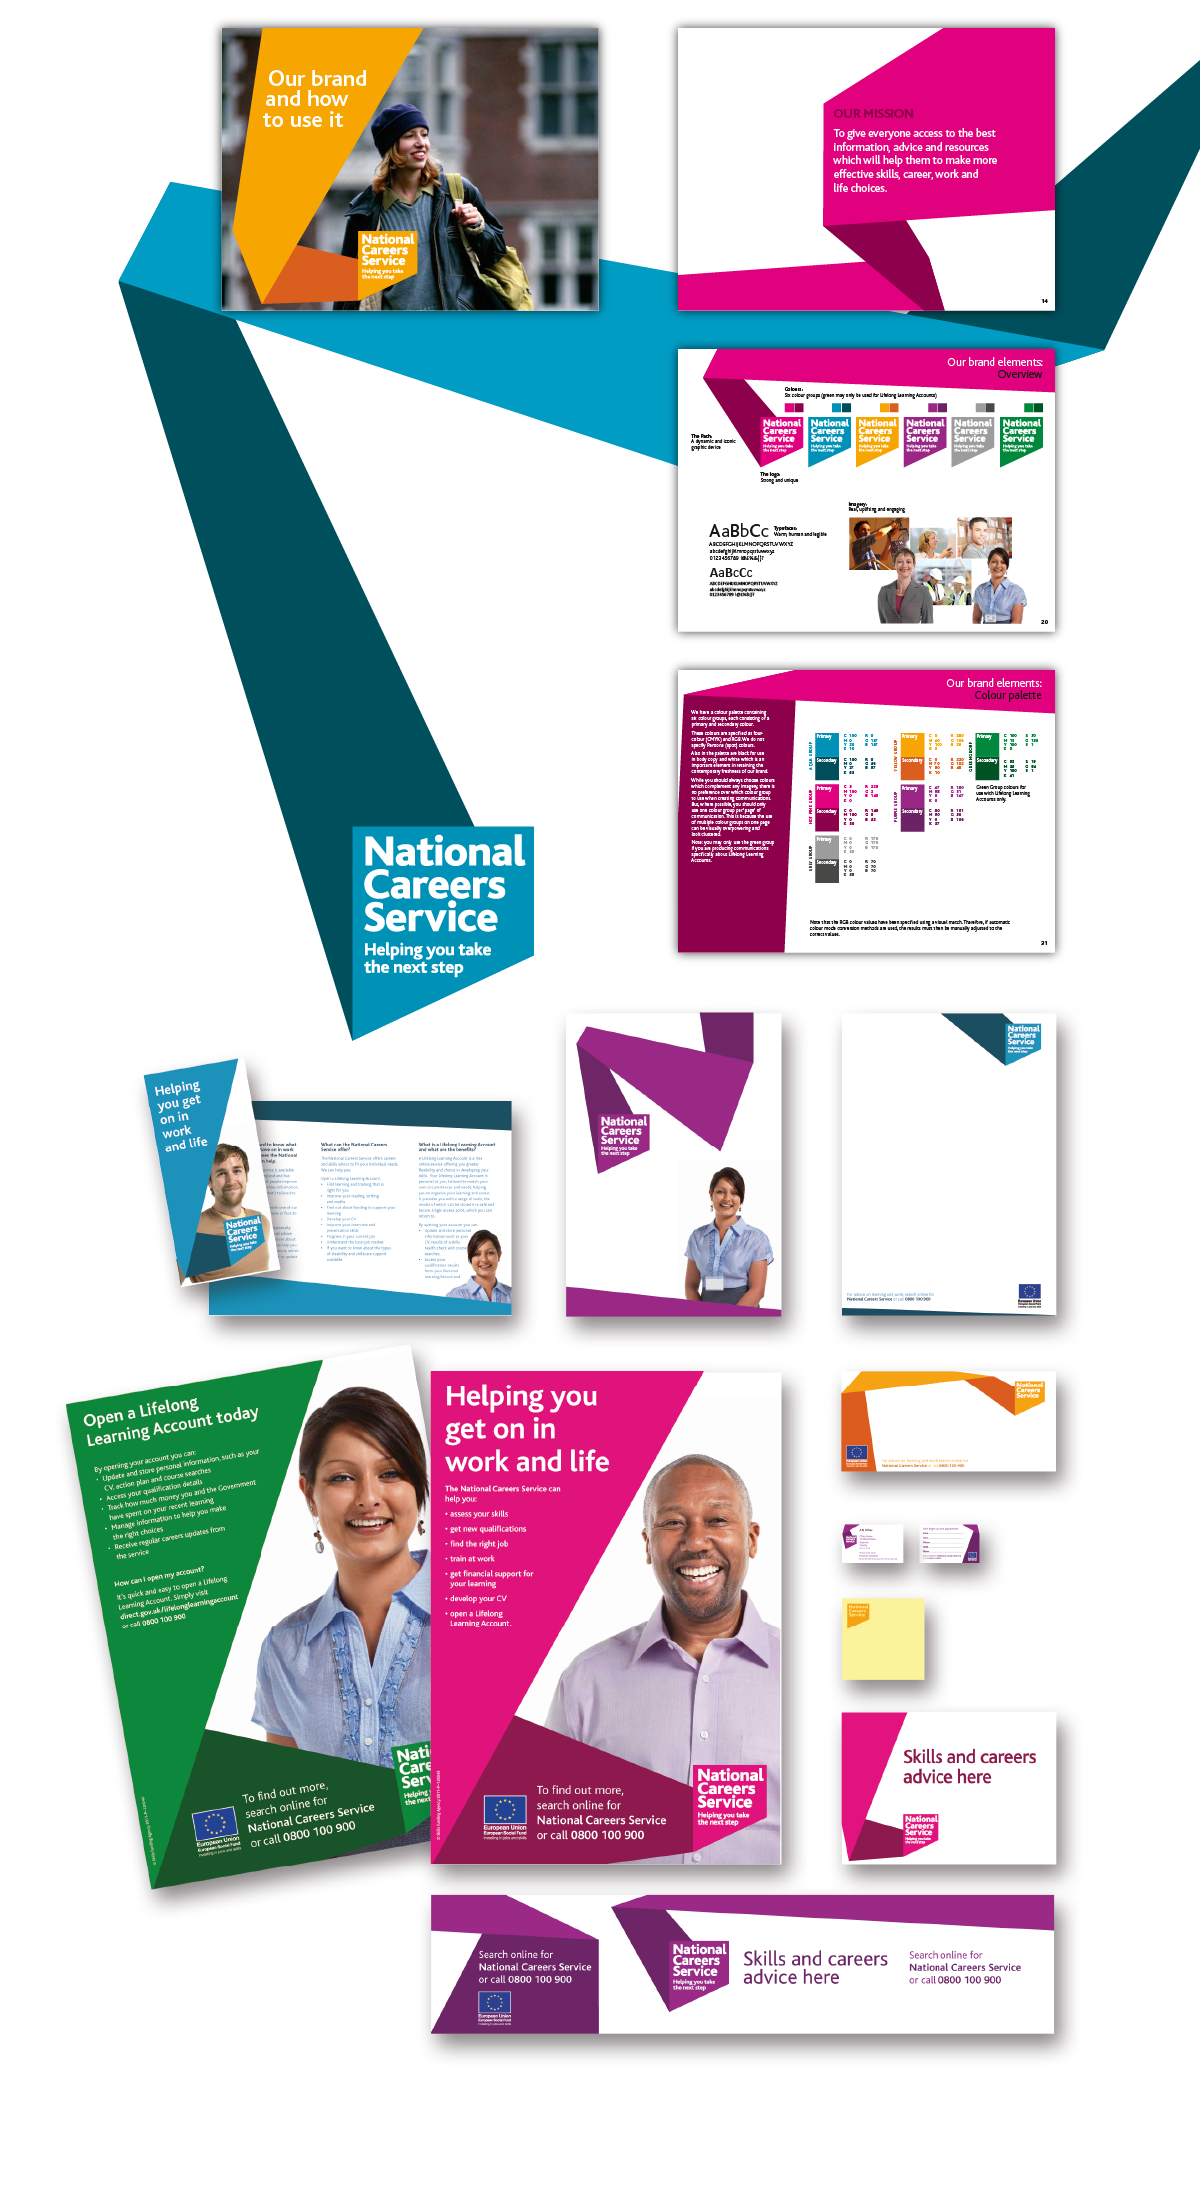 National Careers Service brand guidelines